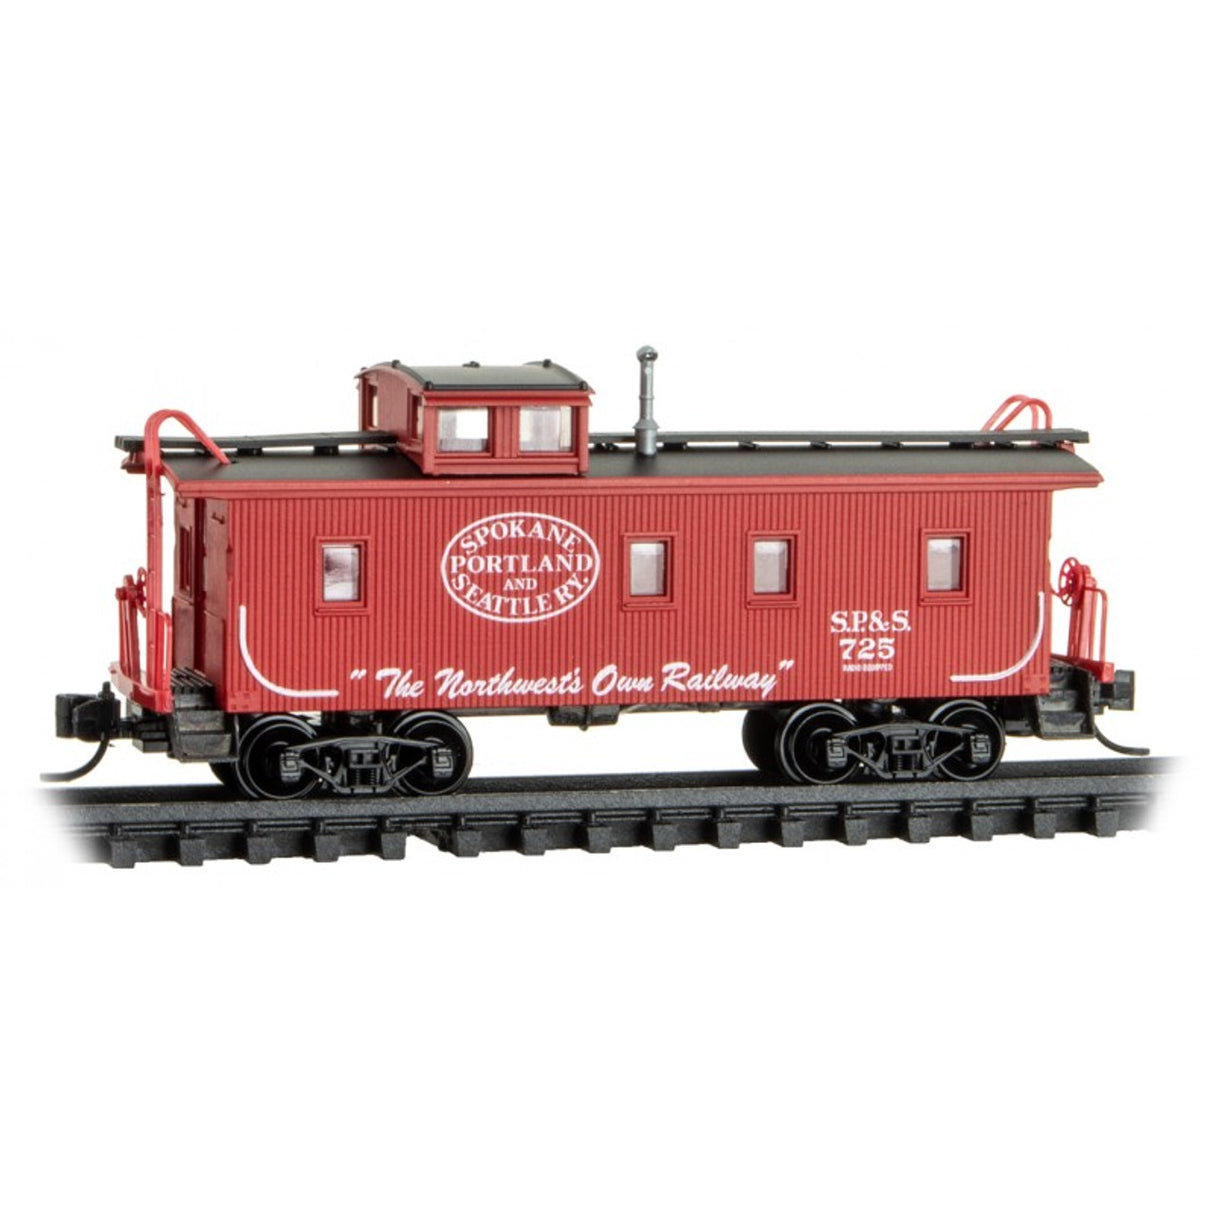 Micro Trains N Scale 34' Wood Sheathed Caboose Spokane, Portland and Seattle SP&S 725